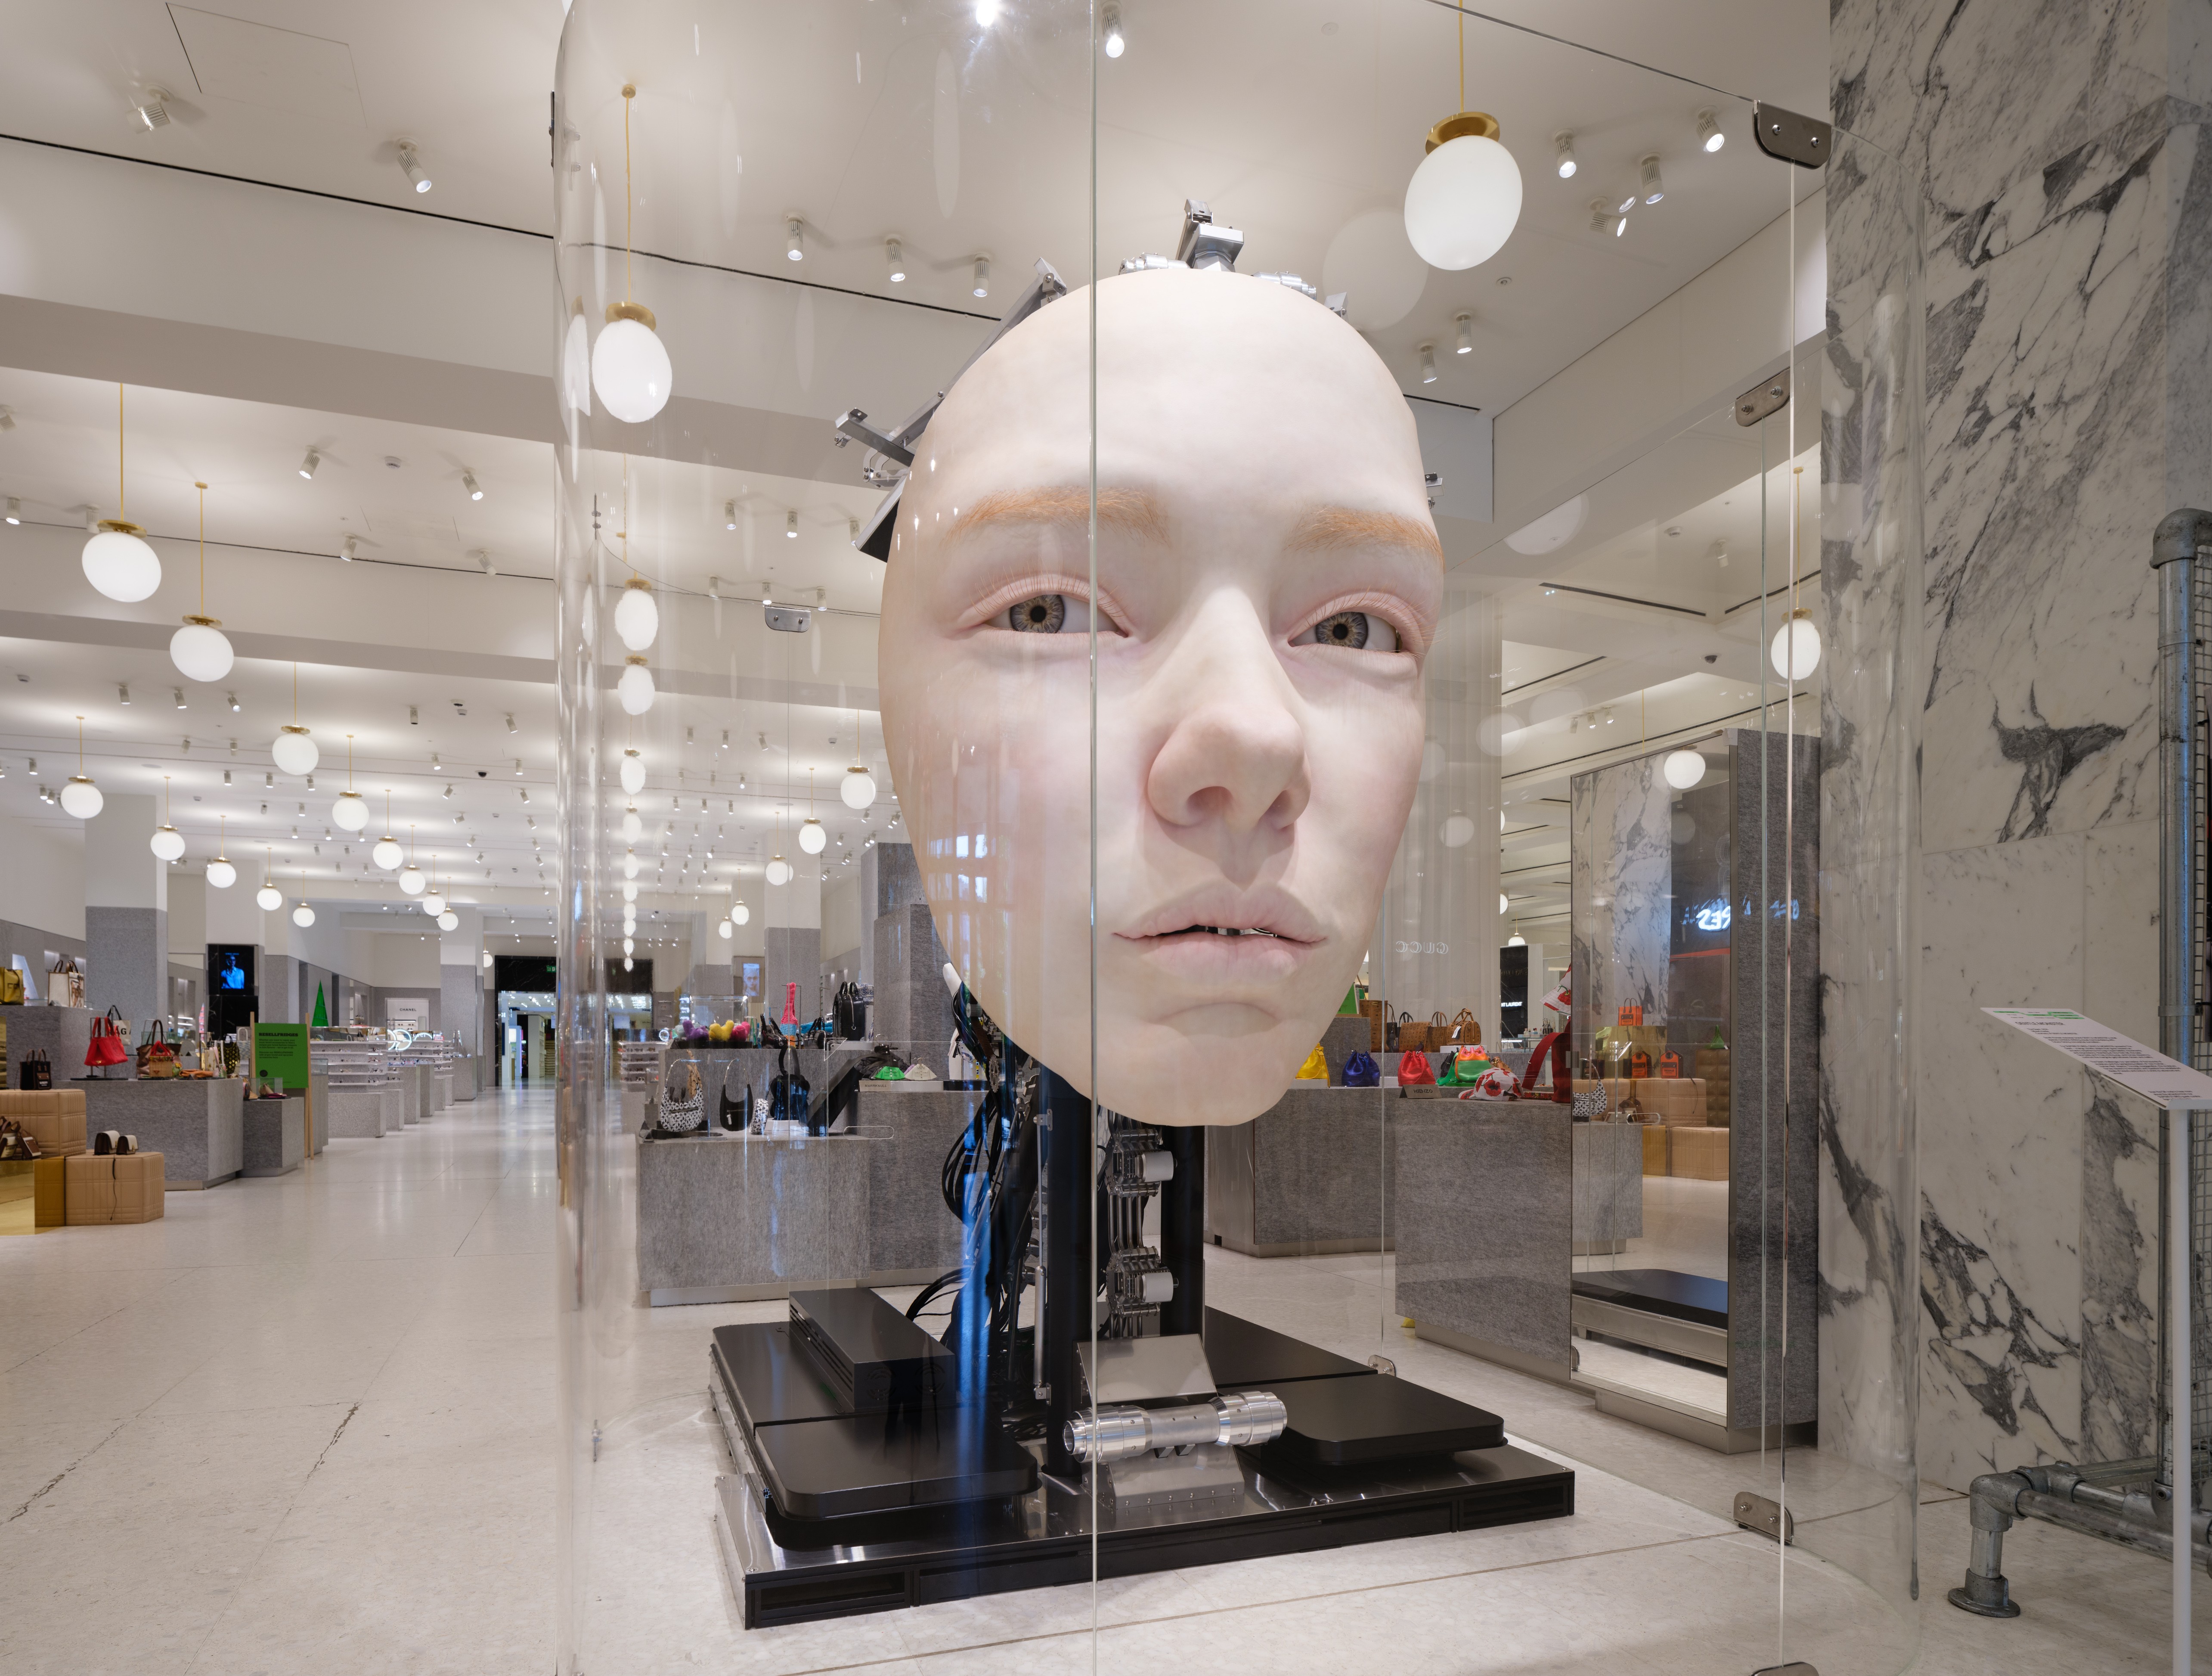 Selfridges - It's time to turn heads. Enter the magical world